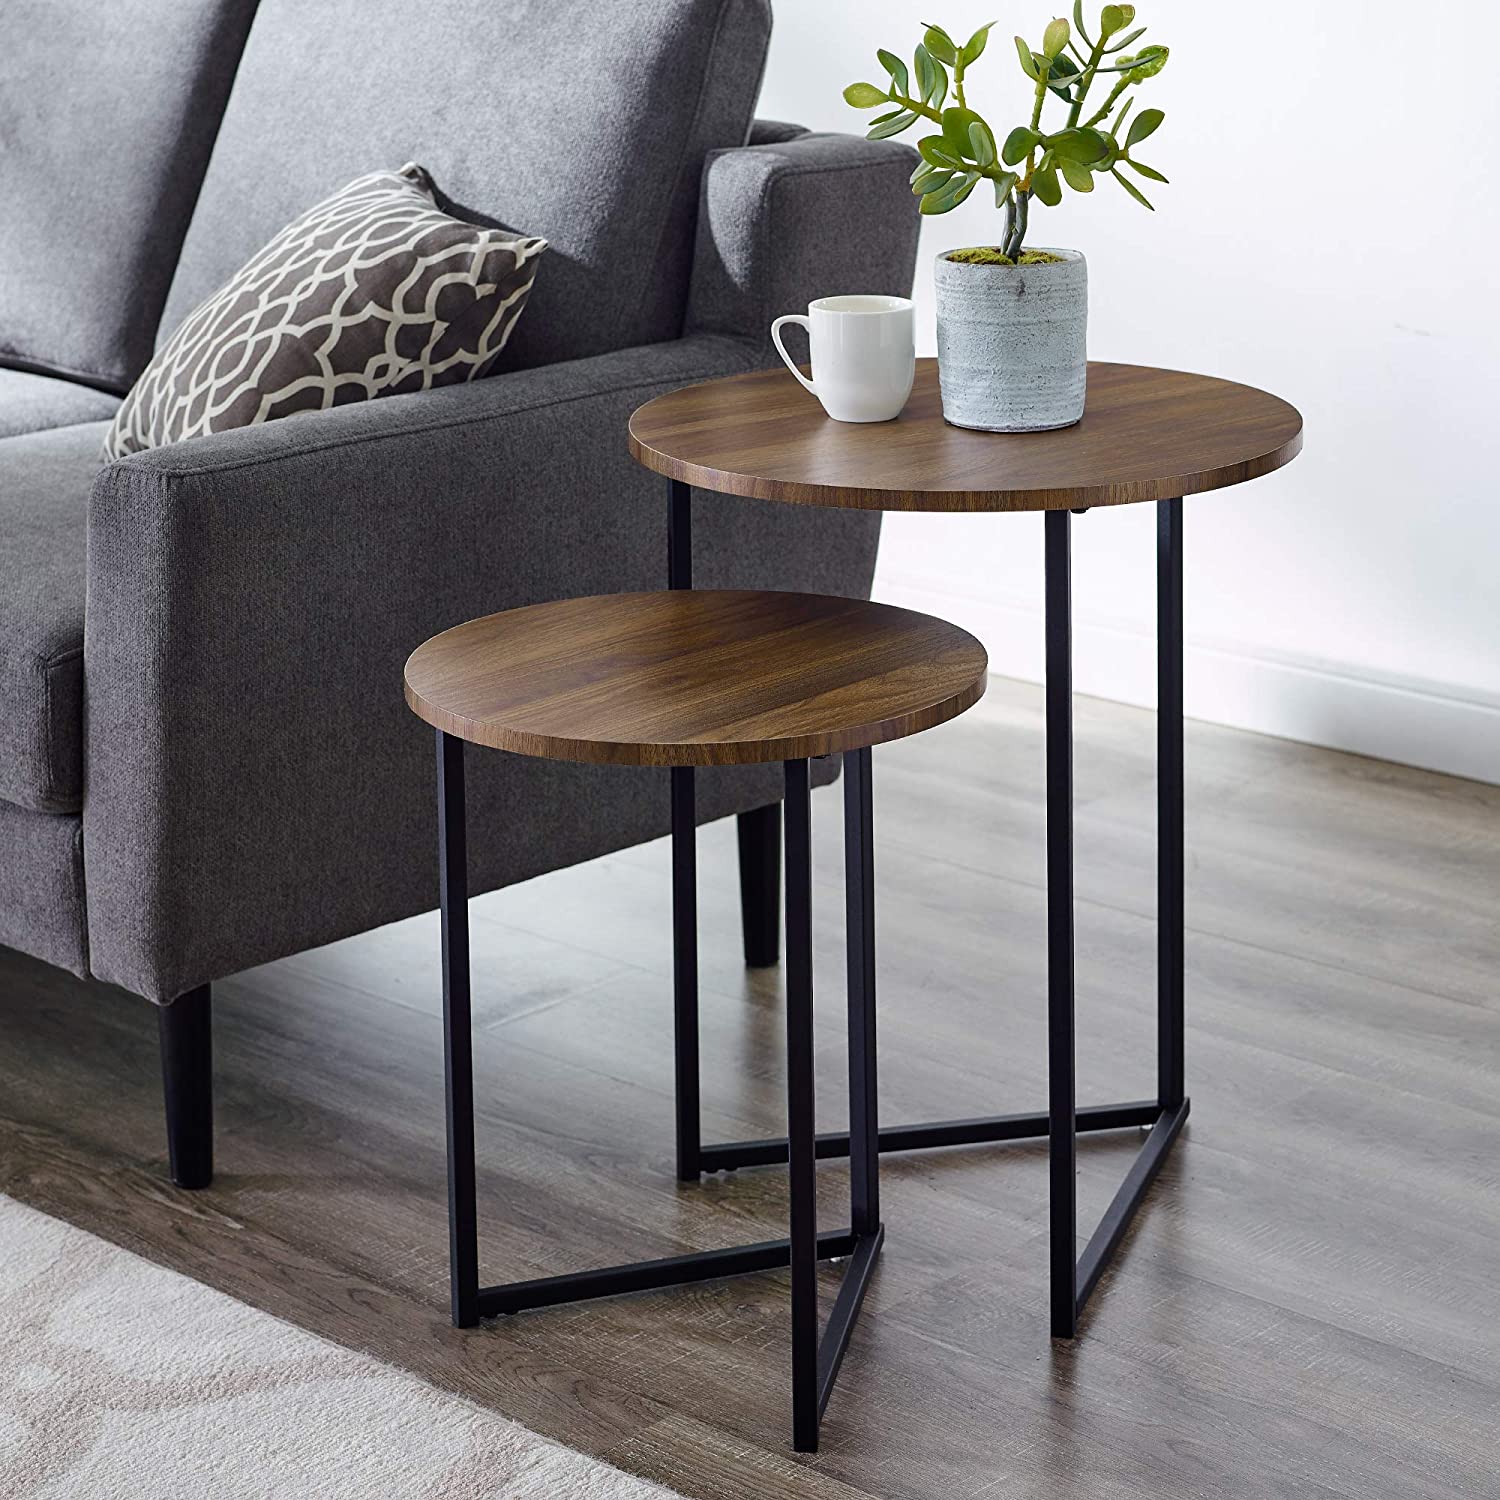 Walker Edison Furniture Company Modern Round Metal Base Nesting Set Side Accent Living Room Storage Small End Table, Set of 2, Walnut Brown